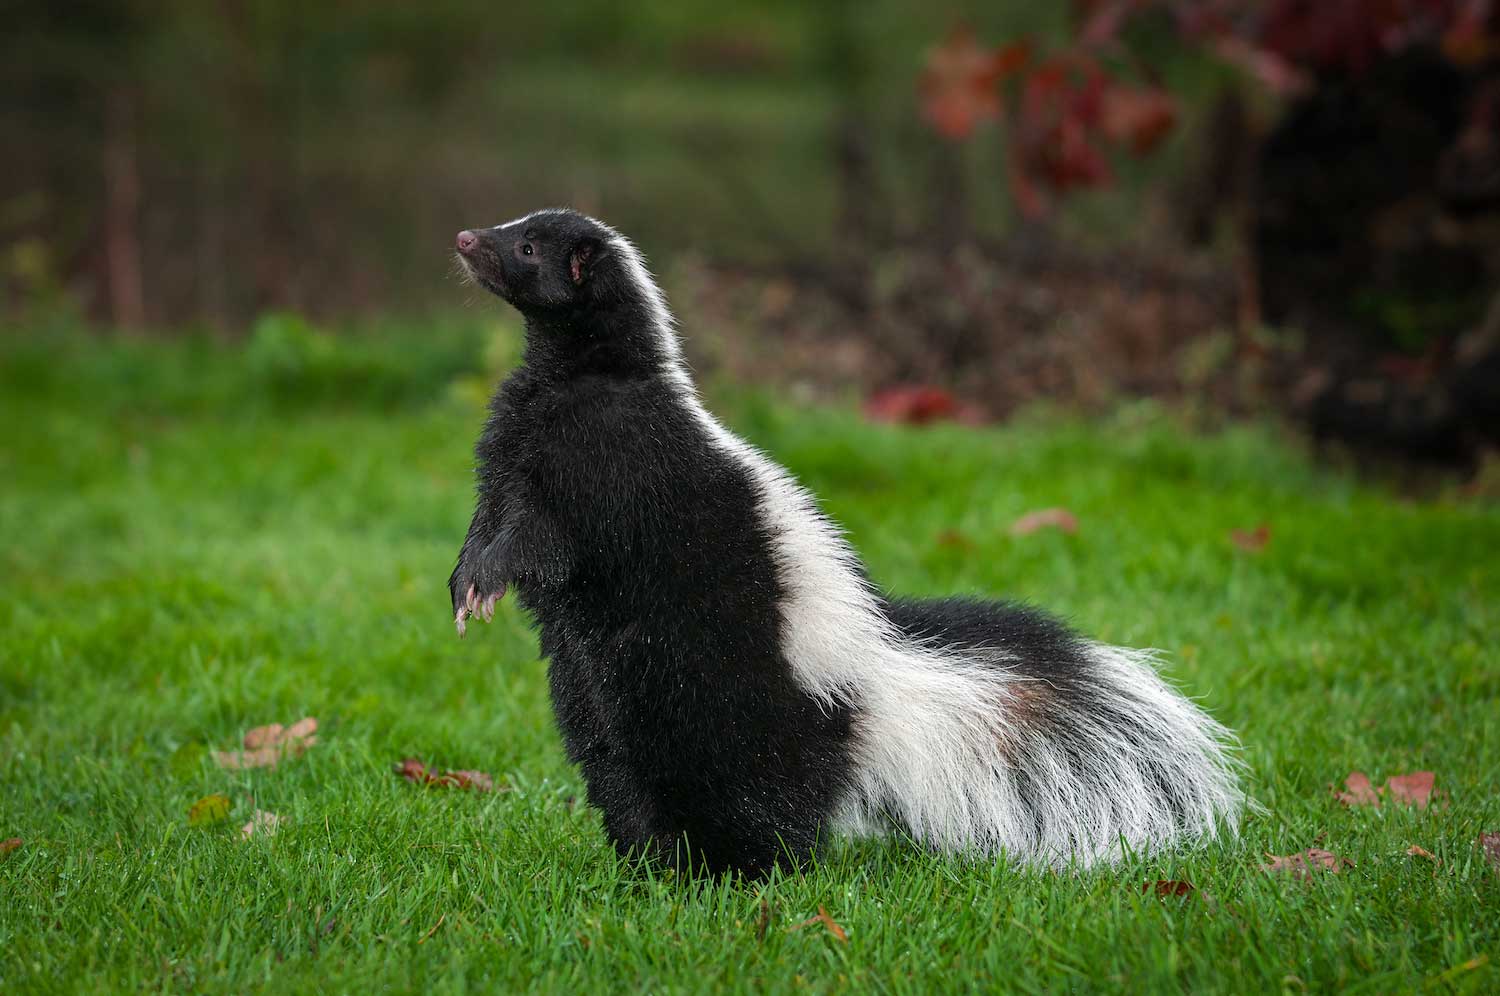 A skunk standing up on its back legs while in the grass.